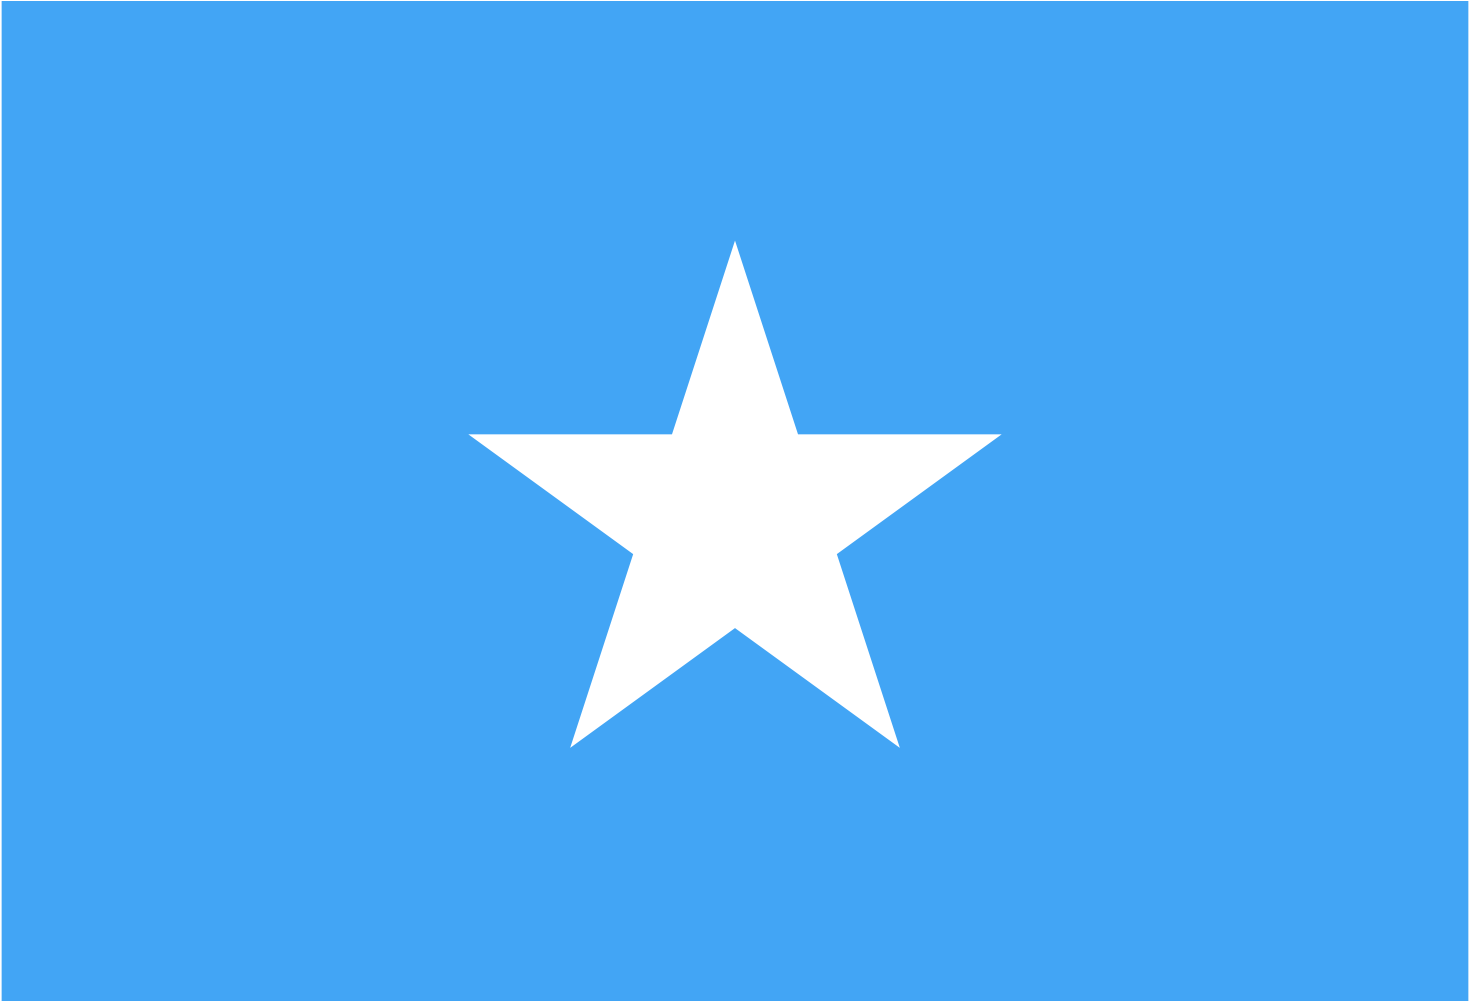 A White Star On A Blue Background